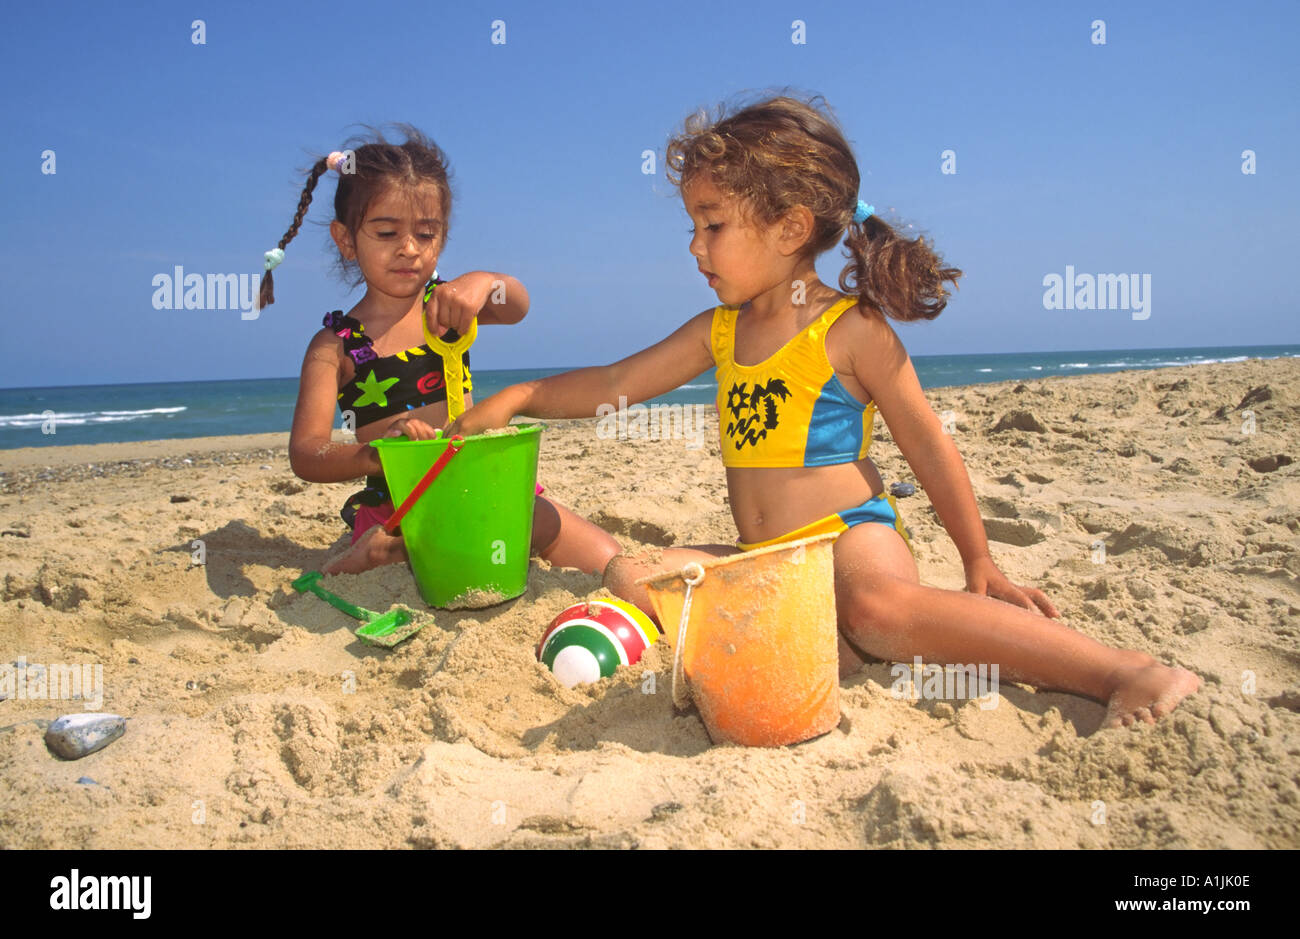 Two Young Girls Playing with Bucket and Spade on Beach Stock Photo - Alamy